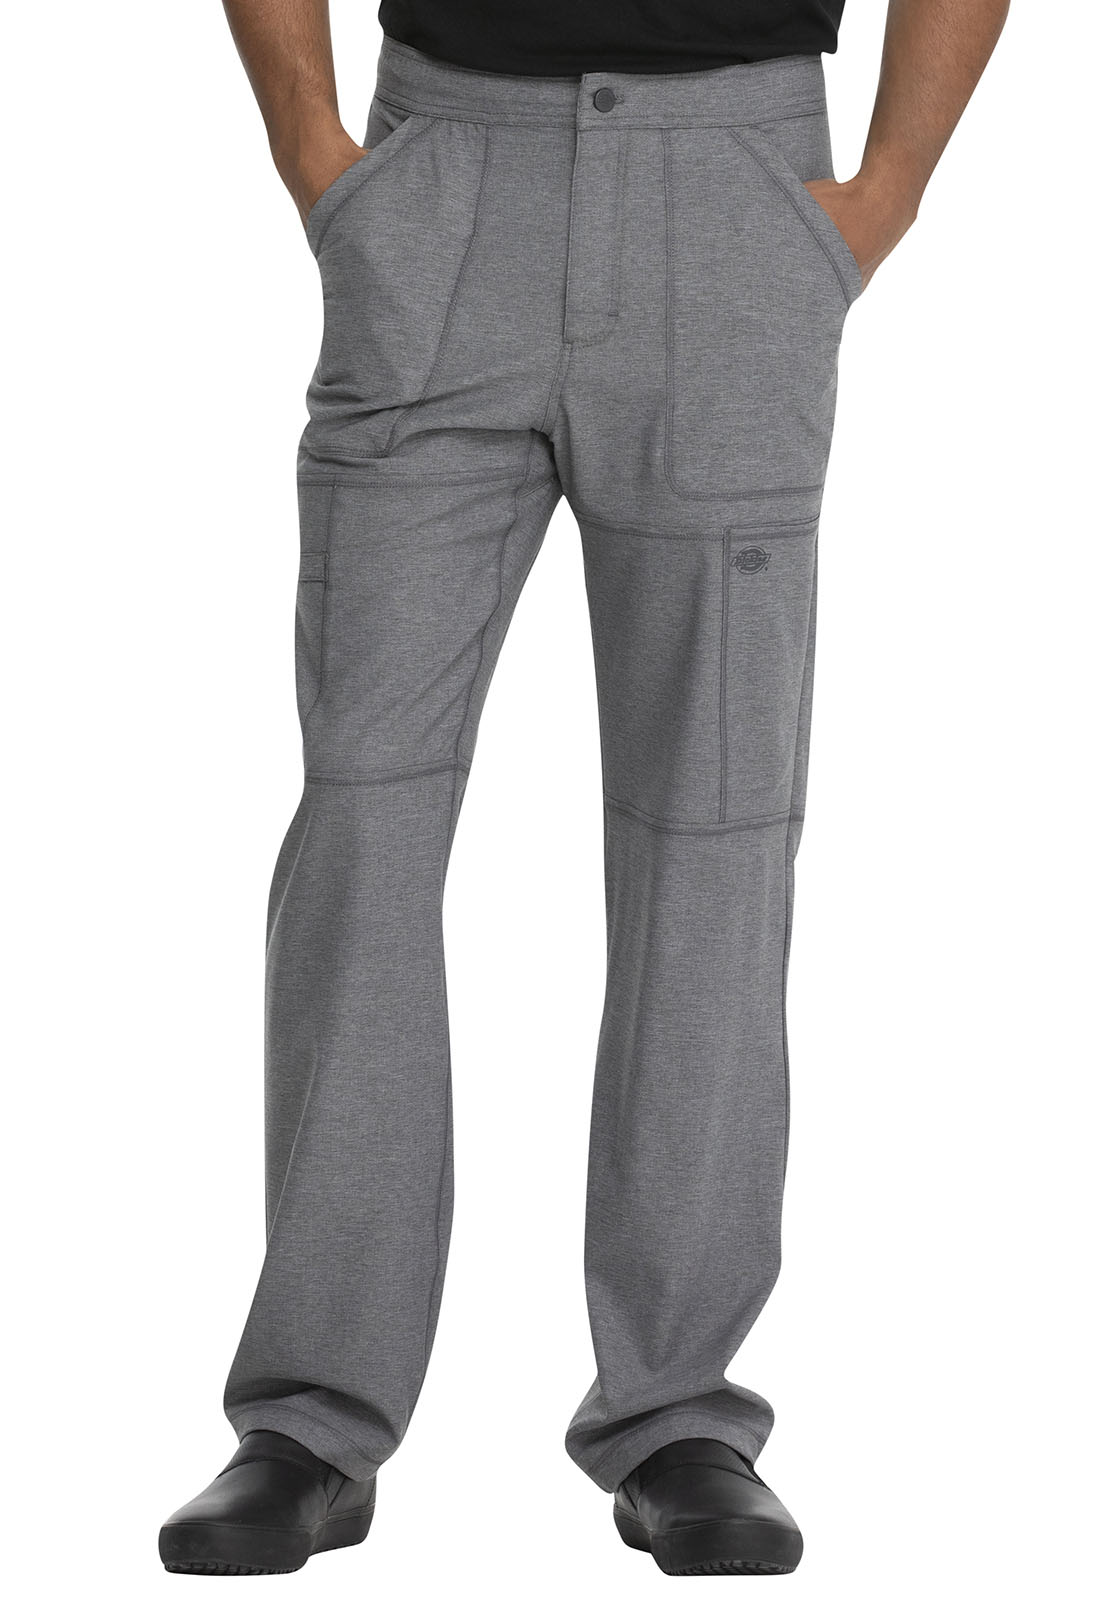 mens grey cargo trousers